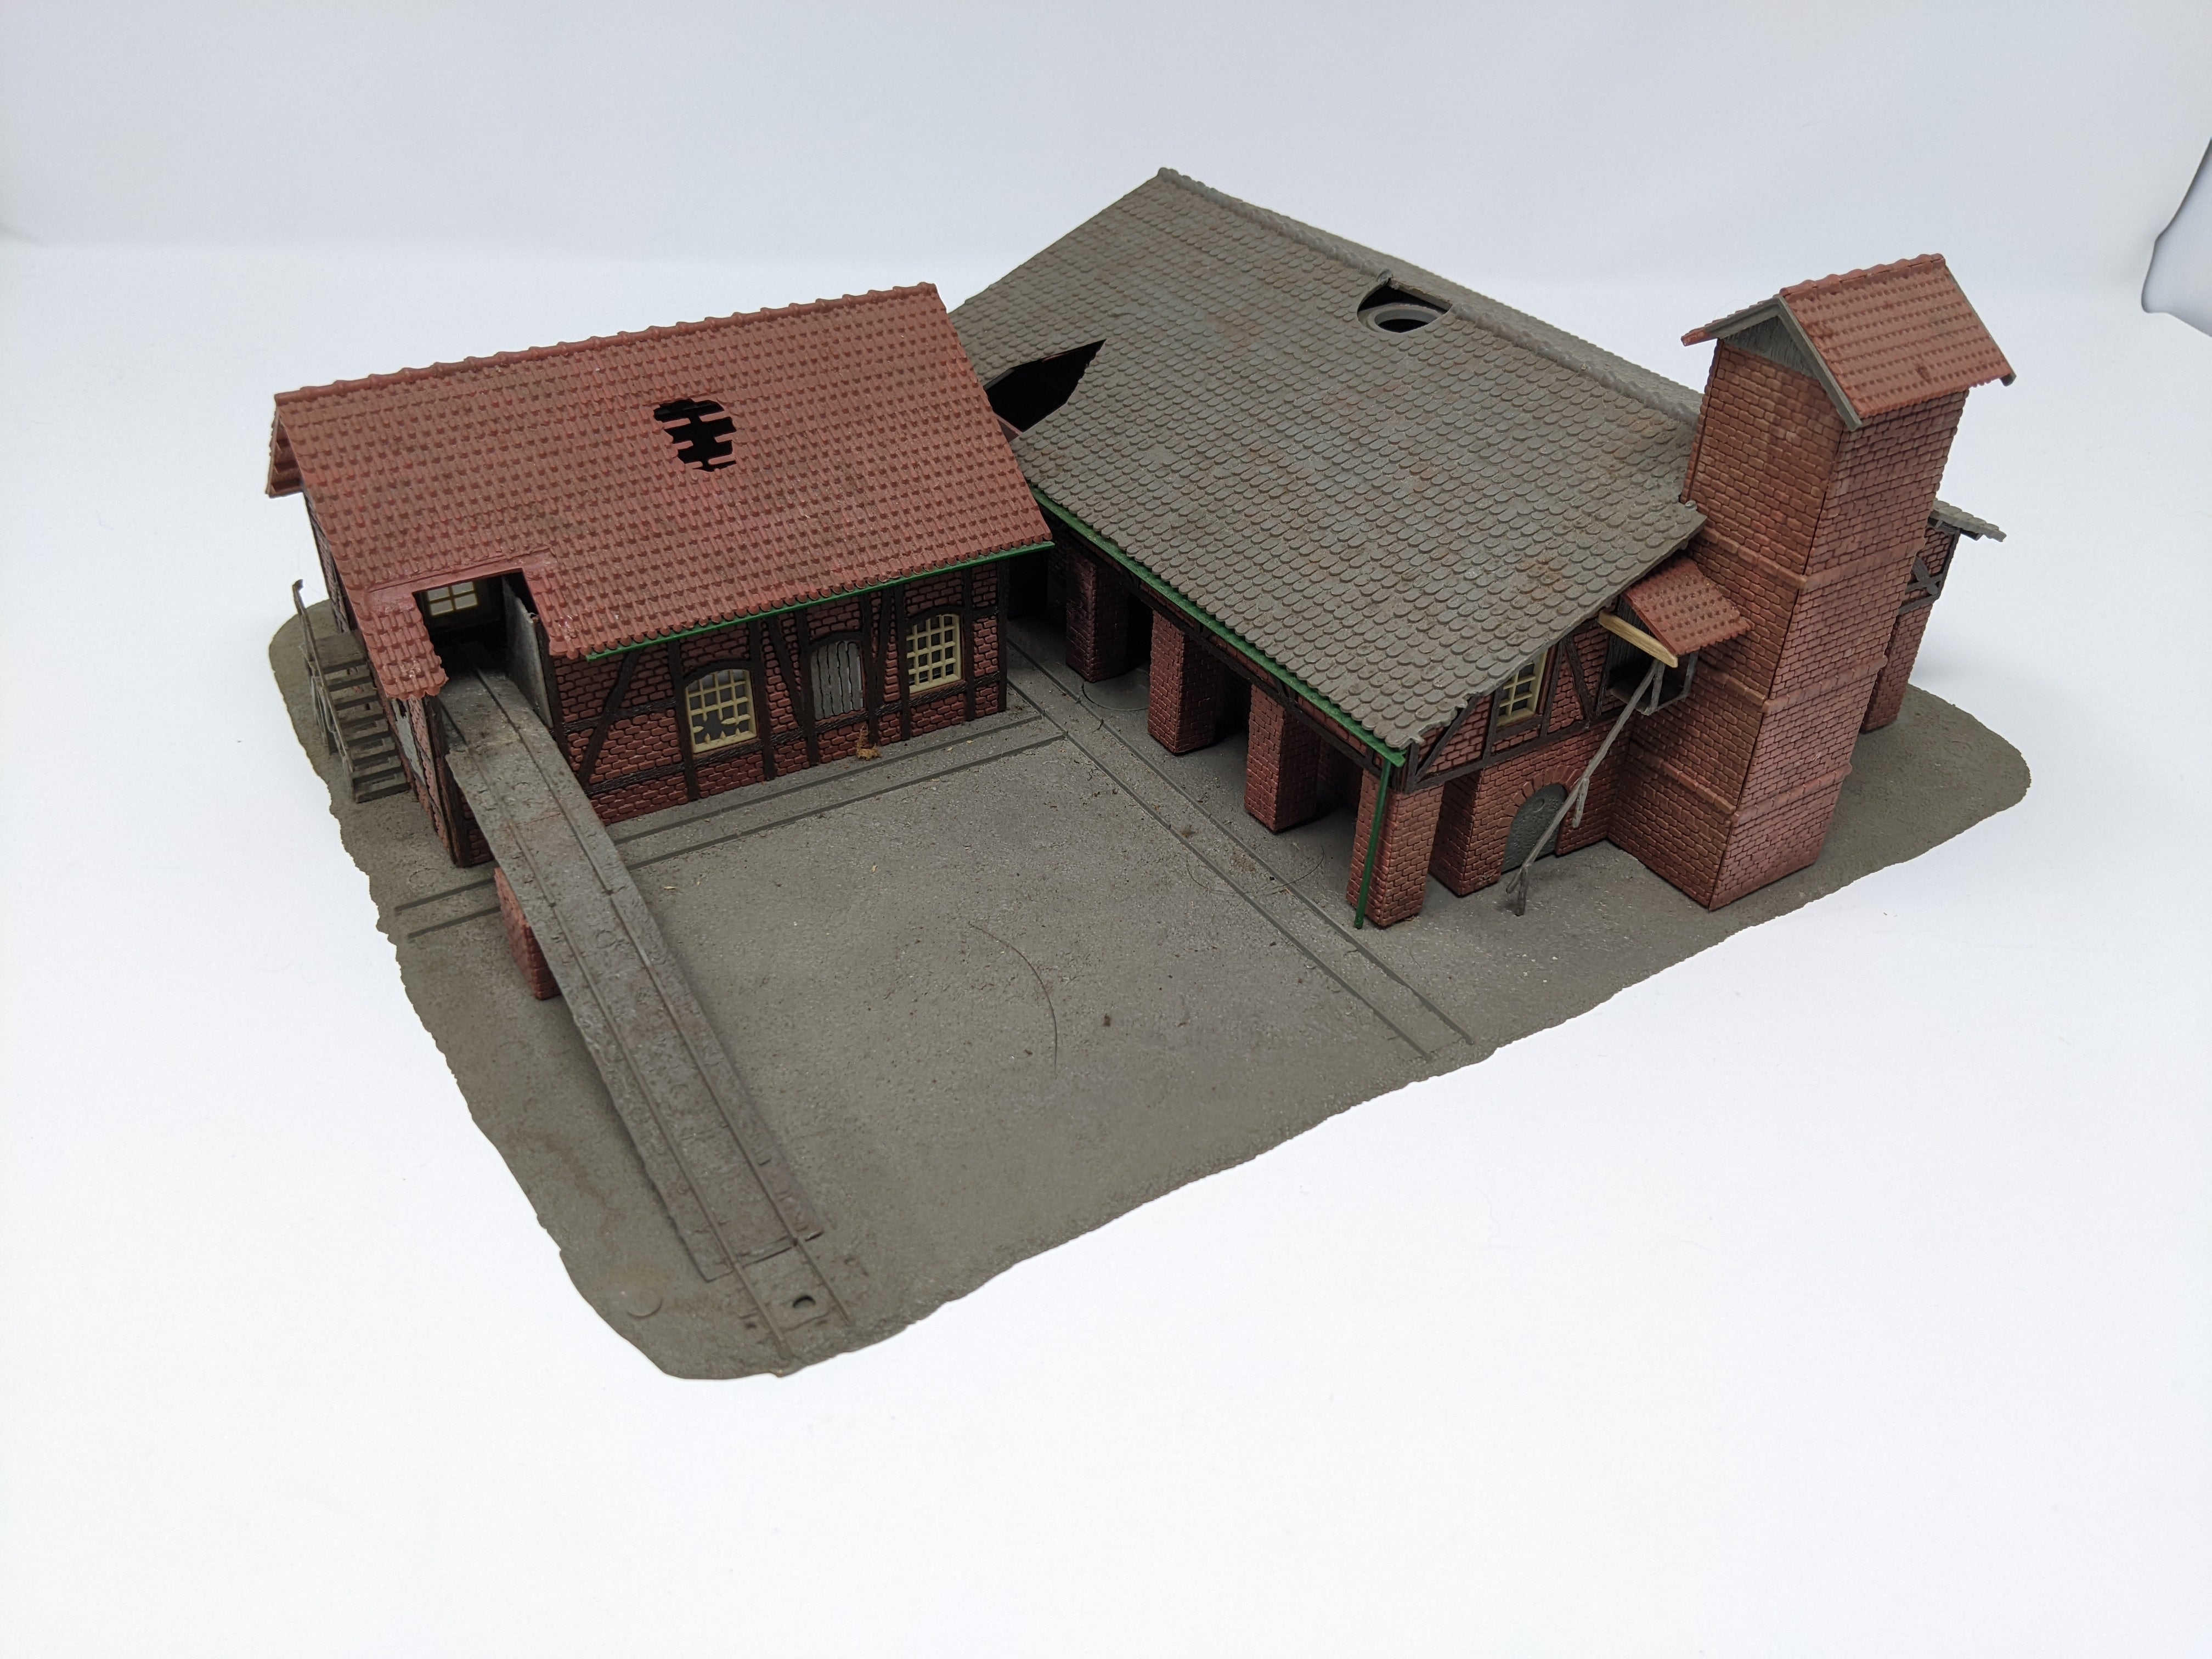 USED HO Scale, Abandoned Manufacturing Building